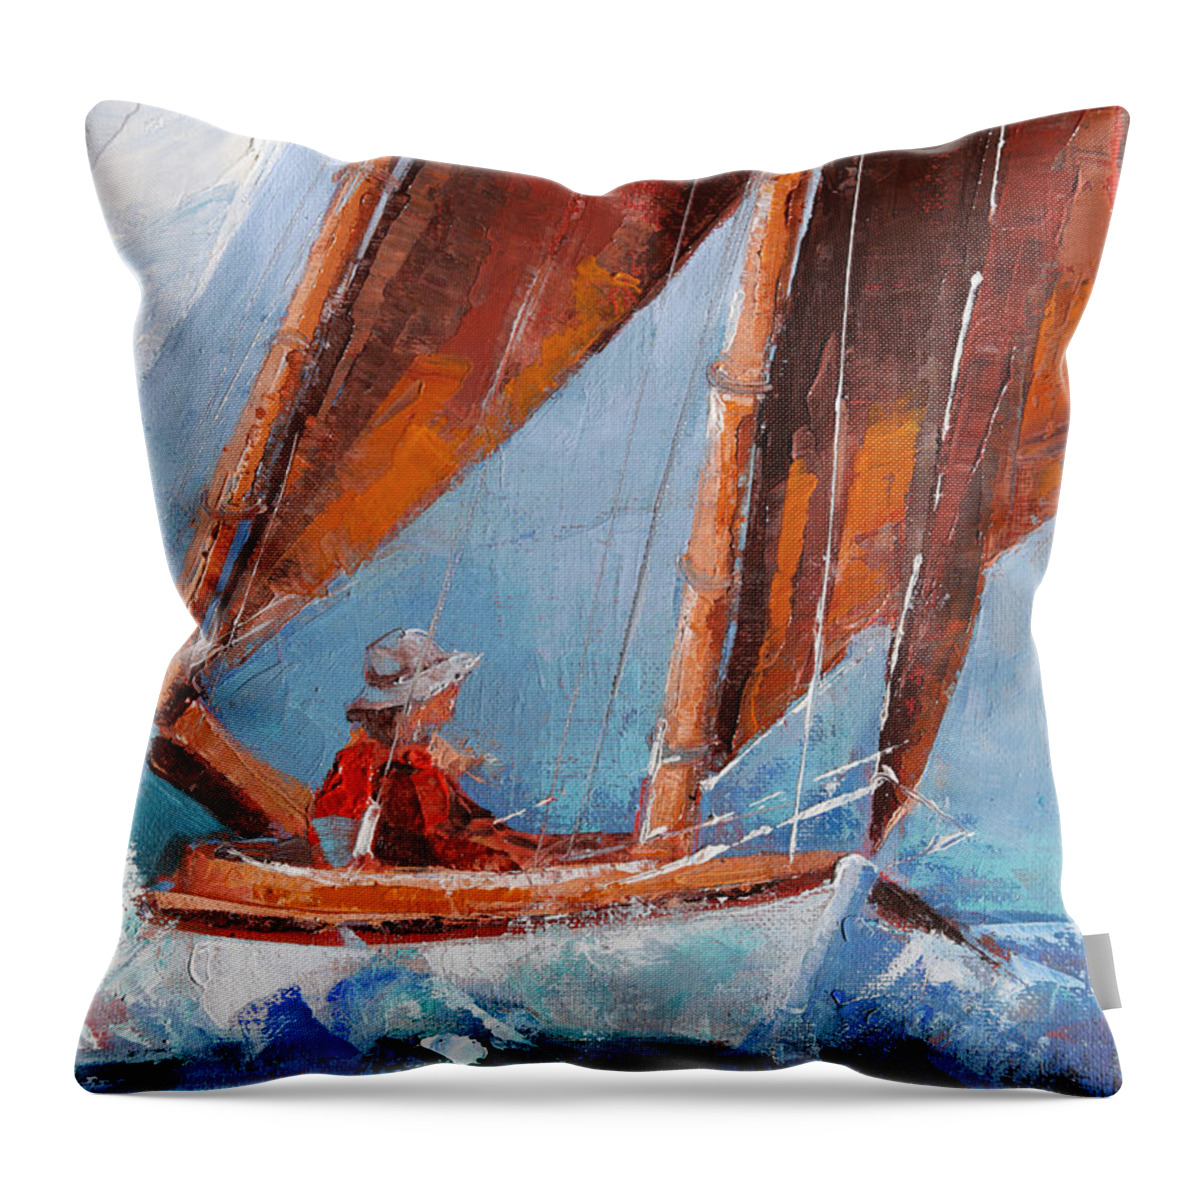 Seascape Throw Pillow featuring the painting Sailboat Therapy by Trina Teele